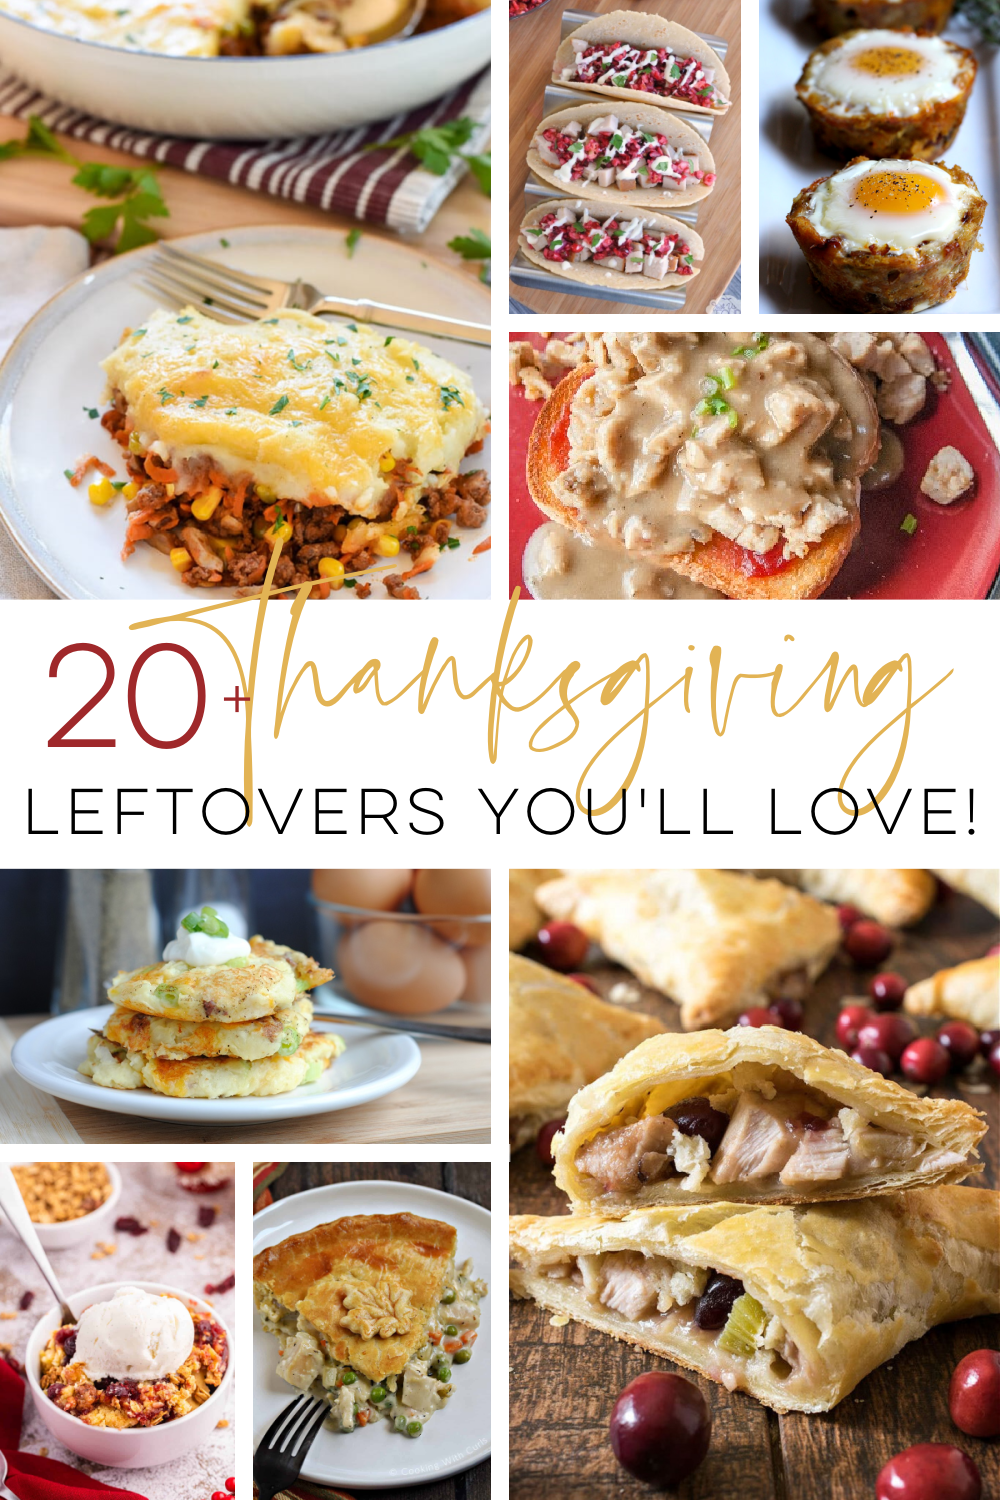 Pinnable Pinterest image for the Thanksgiving Leftovers post.